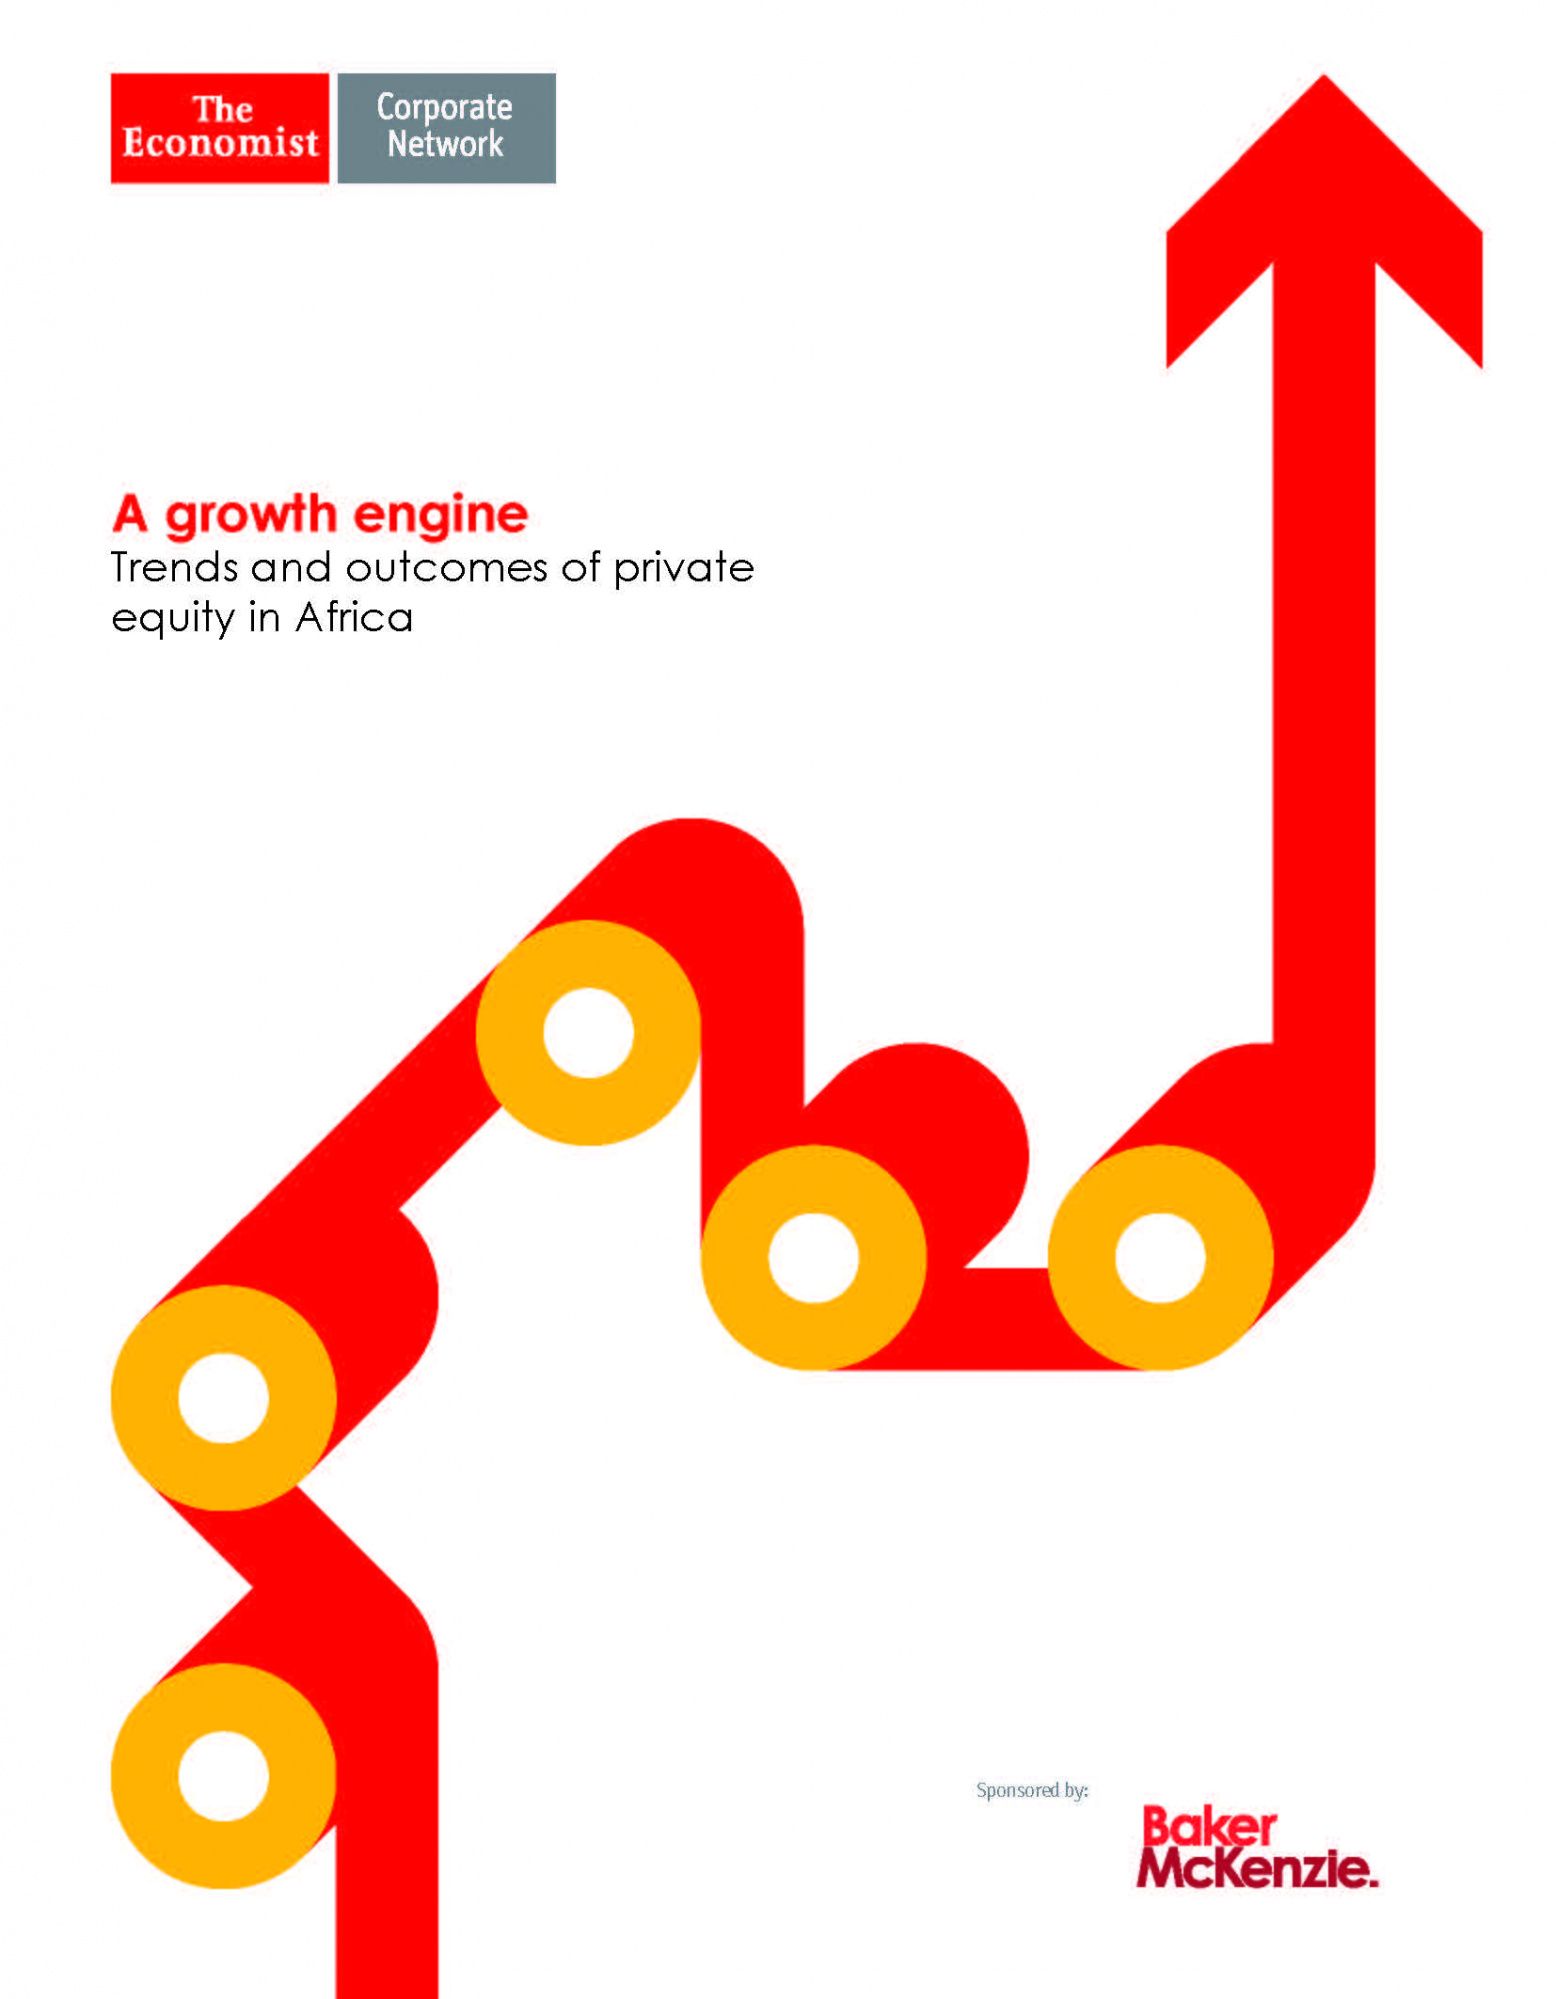 A growth engine: Trends and outcomes of private equity in Africa